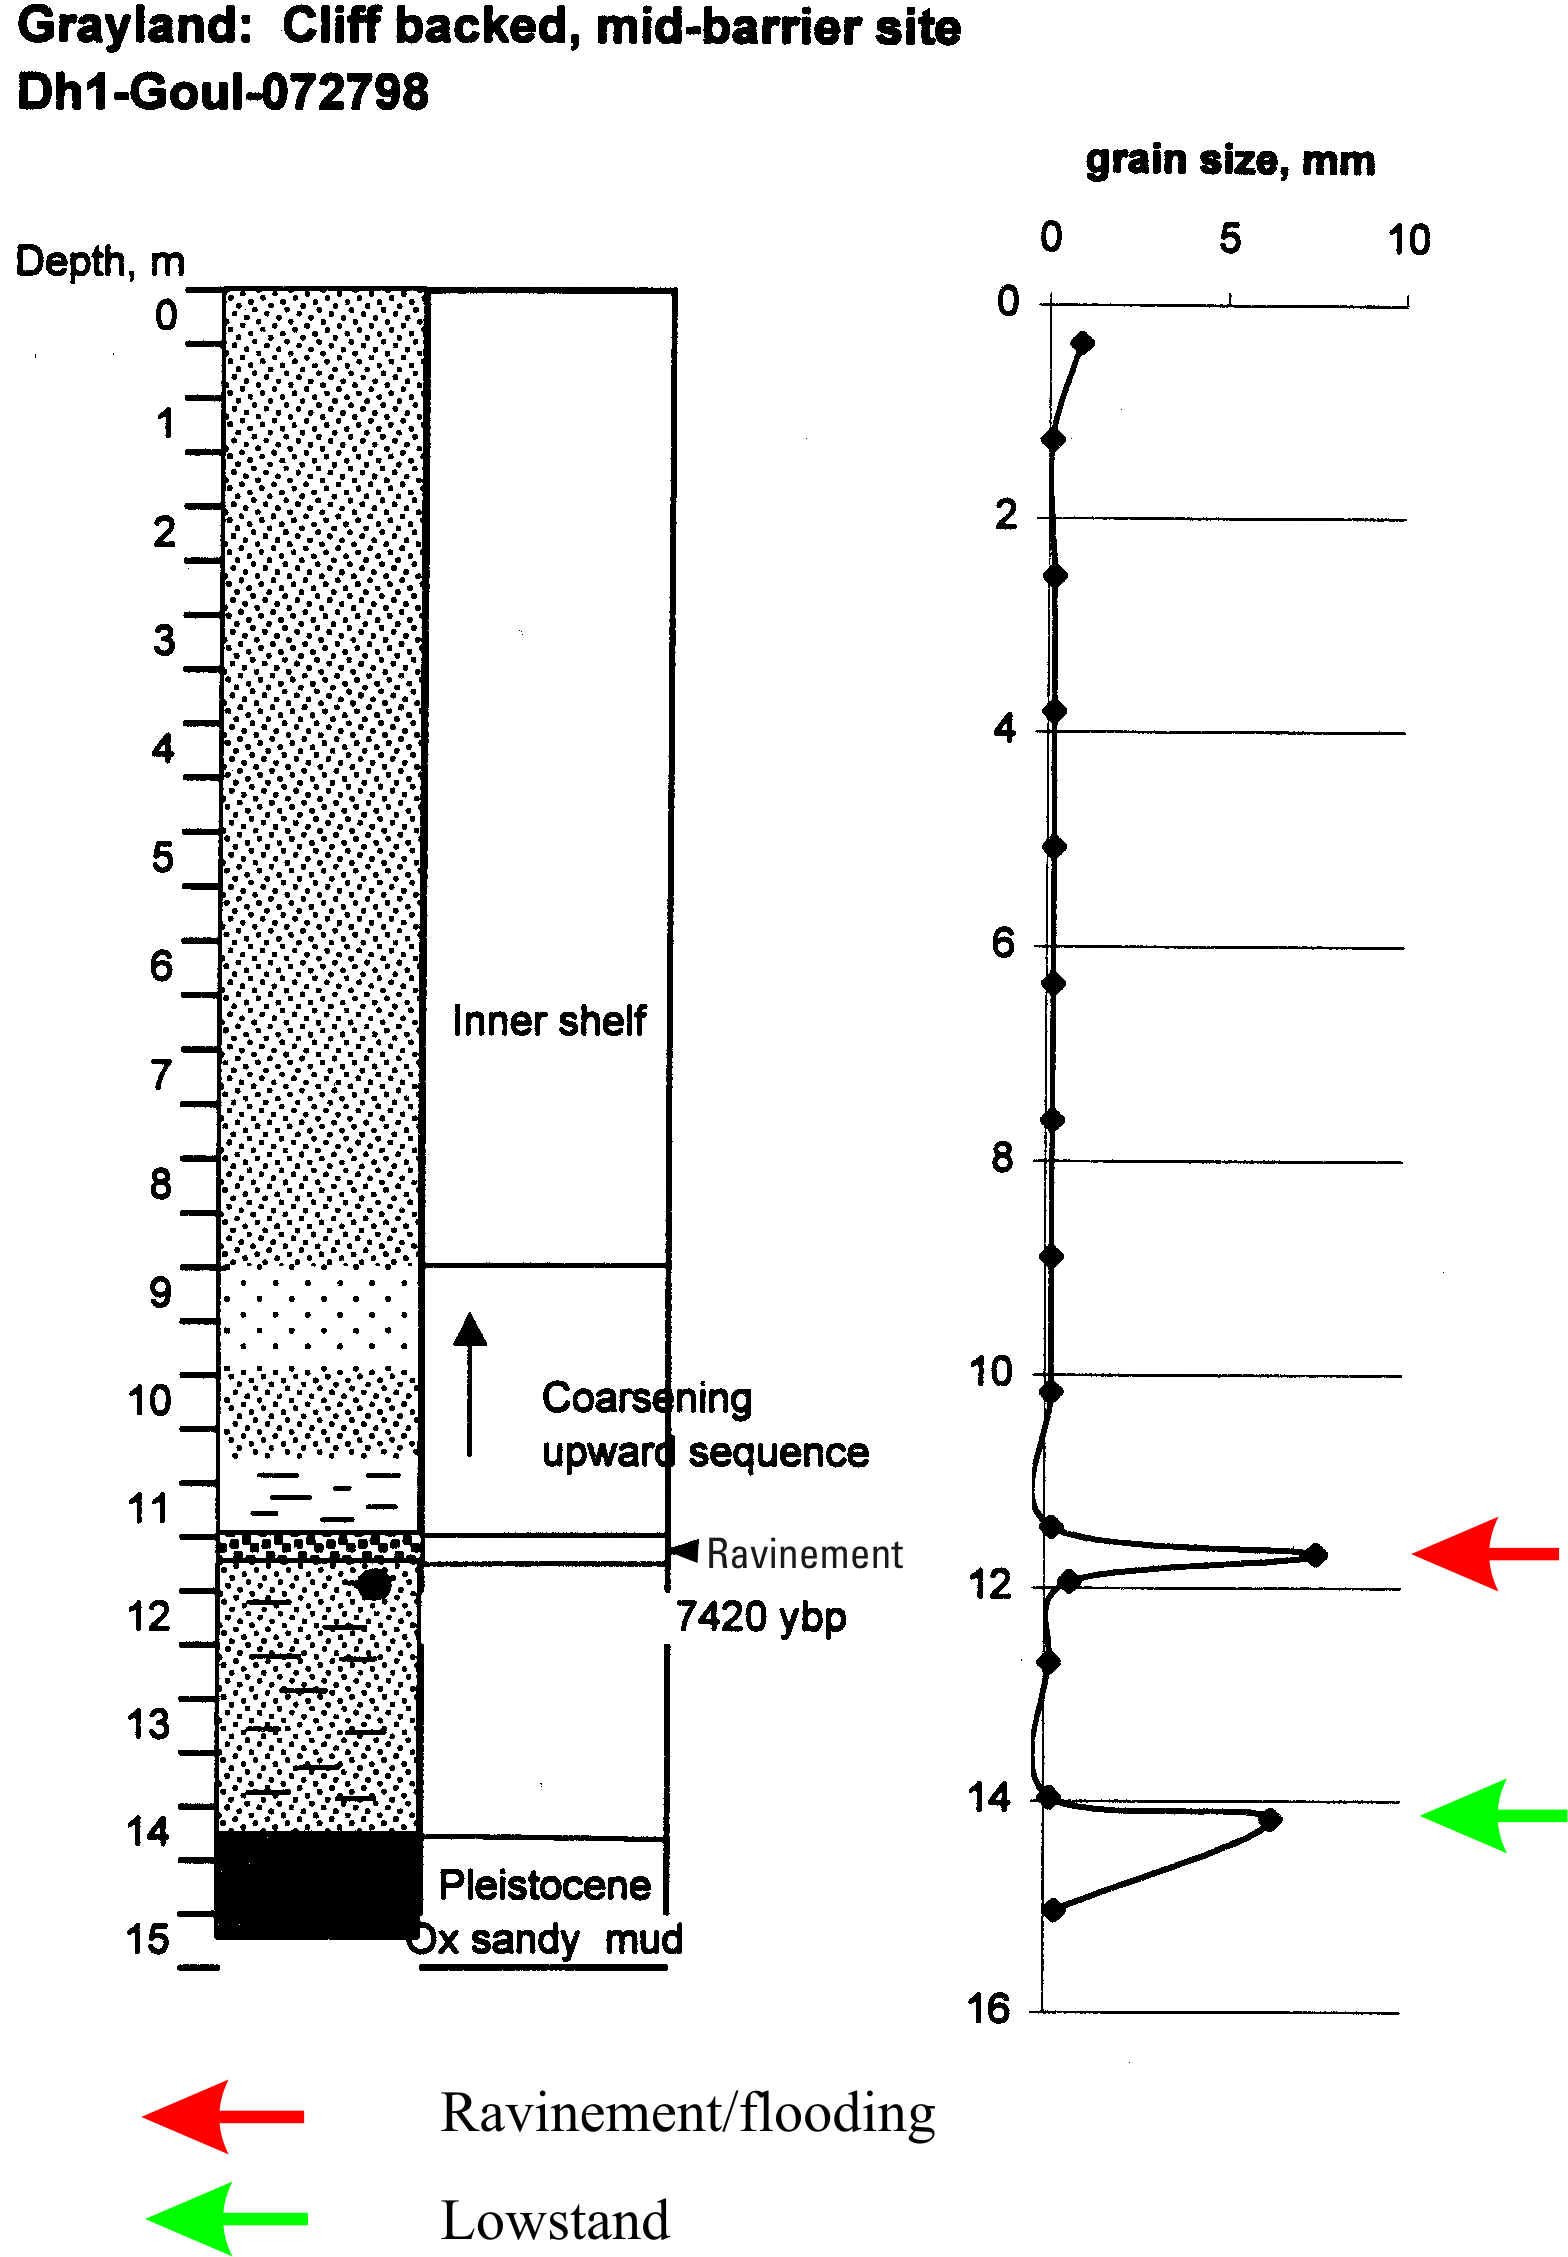 Figure 5. Sample log of a borehole collected in the Grayland Plains area showing the nature of the lowstand and ravinement surfaces as seen in cores.